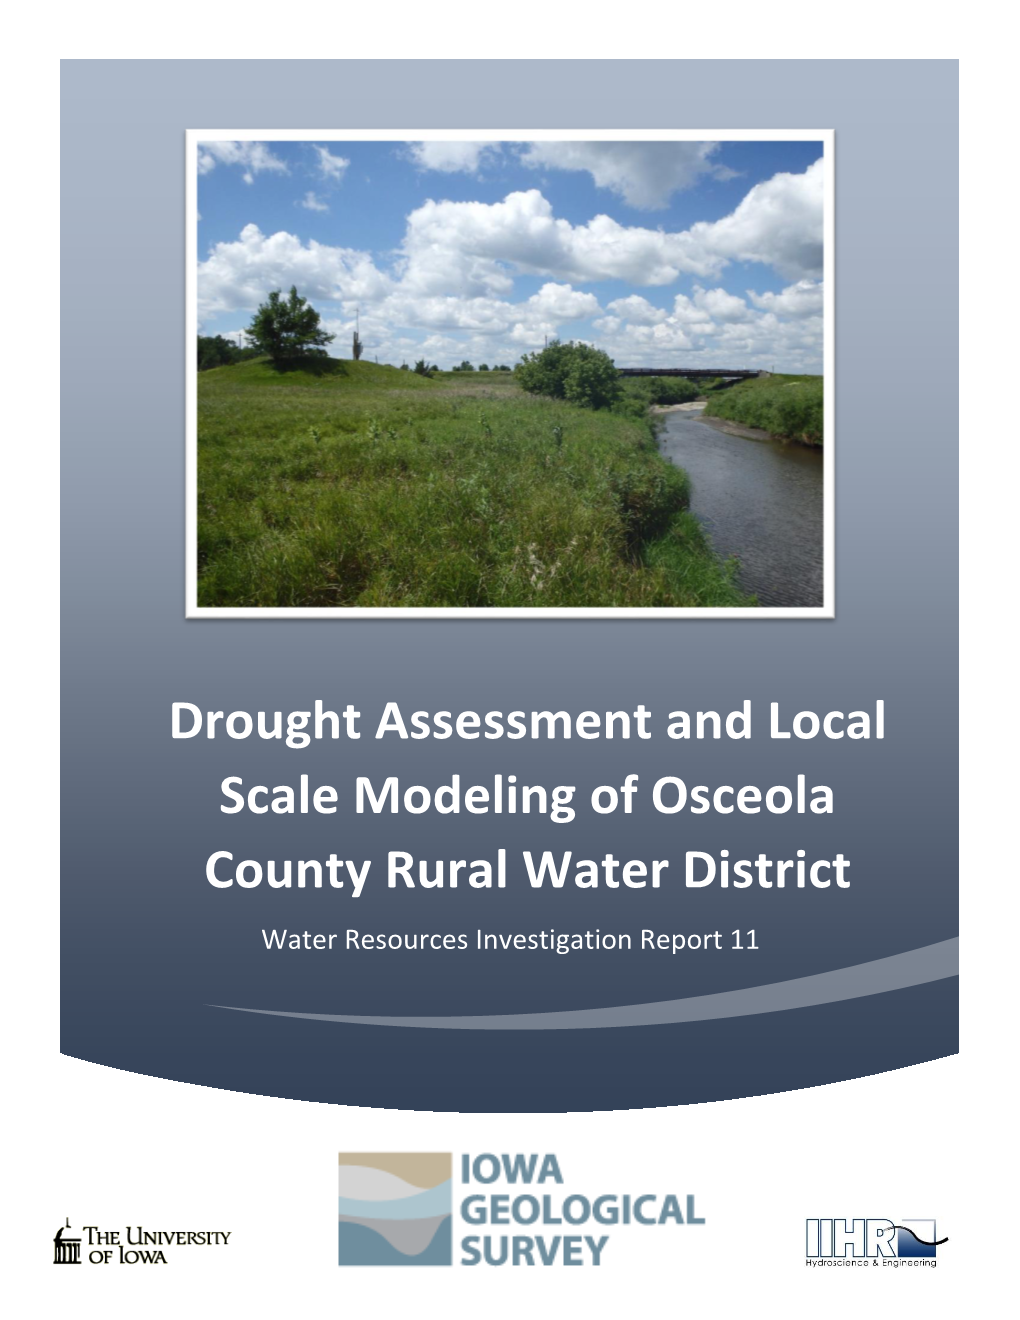 Drought Assessment and Local Scale Modeling of Osceola County Rural Water District Water Resources Investigation Report 11